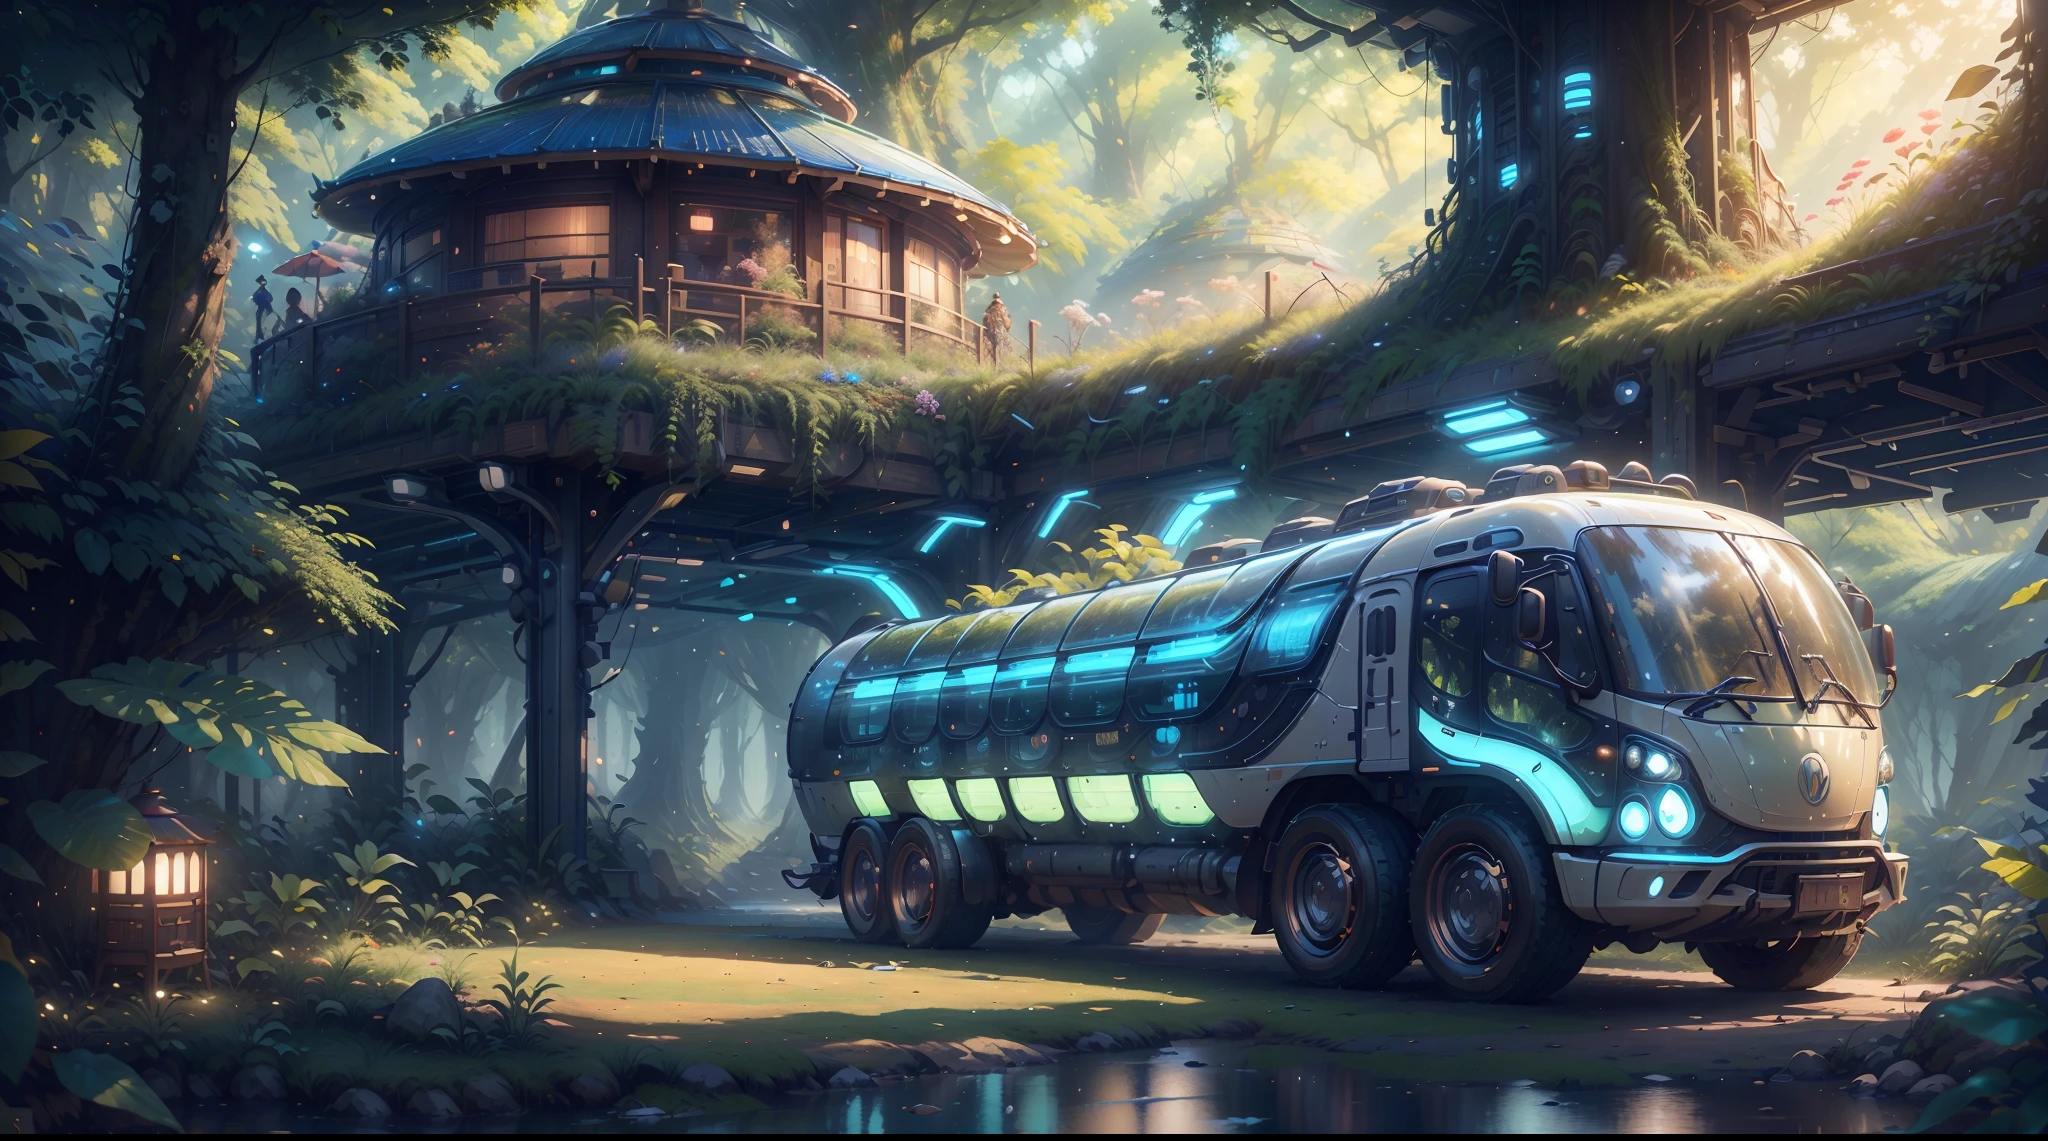 concept-art, best qualtiy，tmasterpiece，Ultra-high resolution，photograph realistic：1.4， Ultra-detail，A futuristic(SolarpunkAI:Campervan),Colorful LED lights,Smooth curves,(streamlined line design)。cozily, camping, vivd colour,Reflection,Surrounded by nature,Peach Blossom Forest，lush landscape。